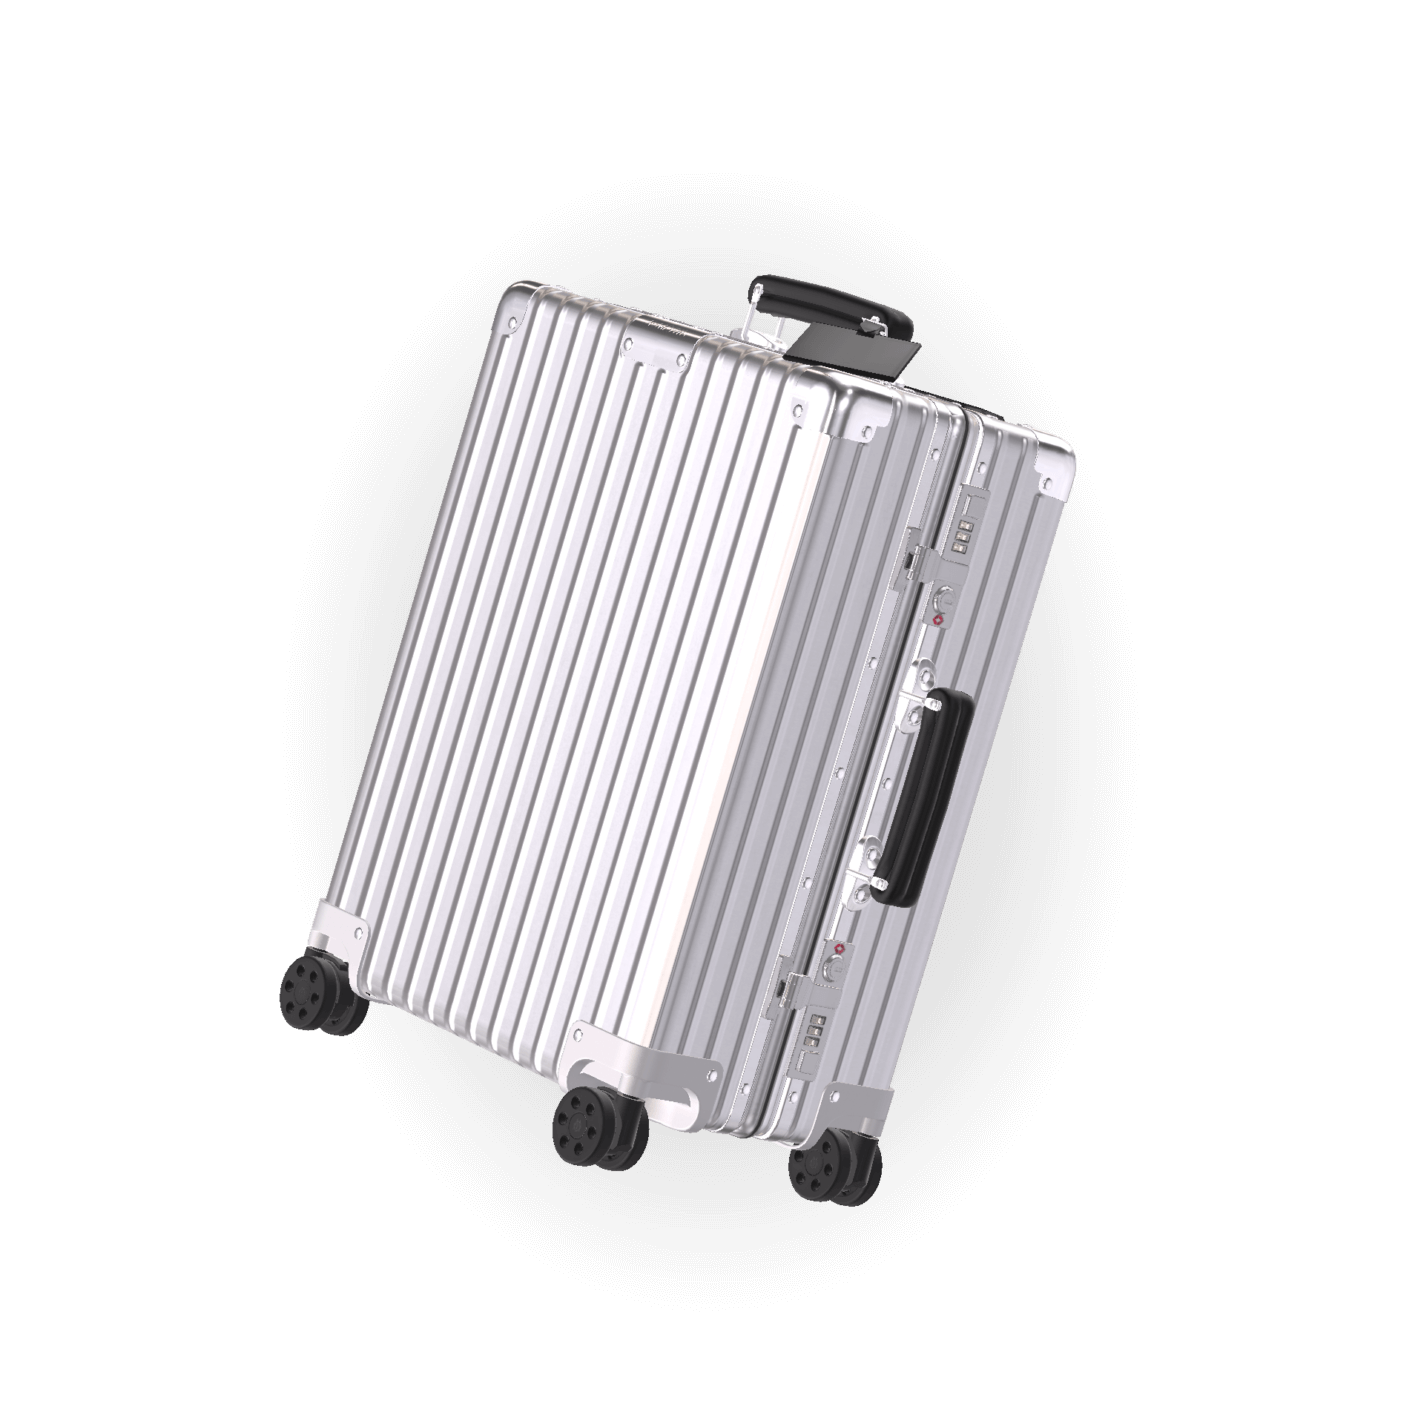 A silver, hard-shell suitcase with four wheels and reinforced metal corners, standing upright on a black background.